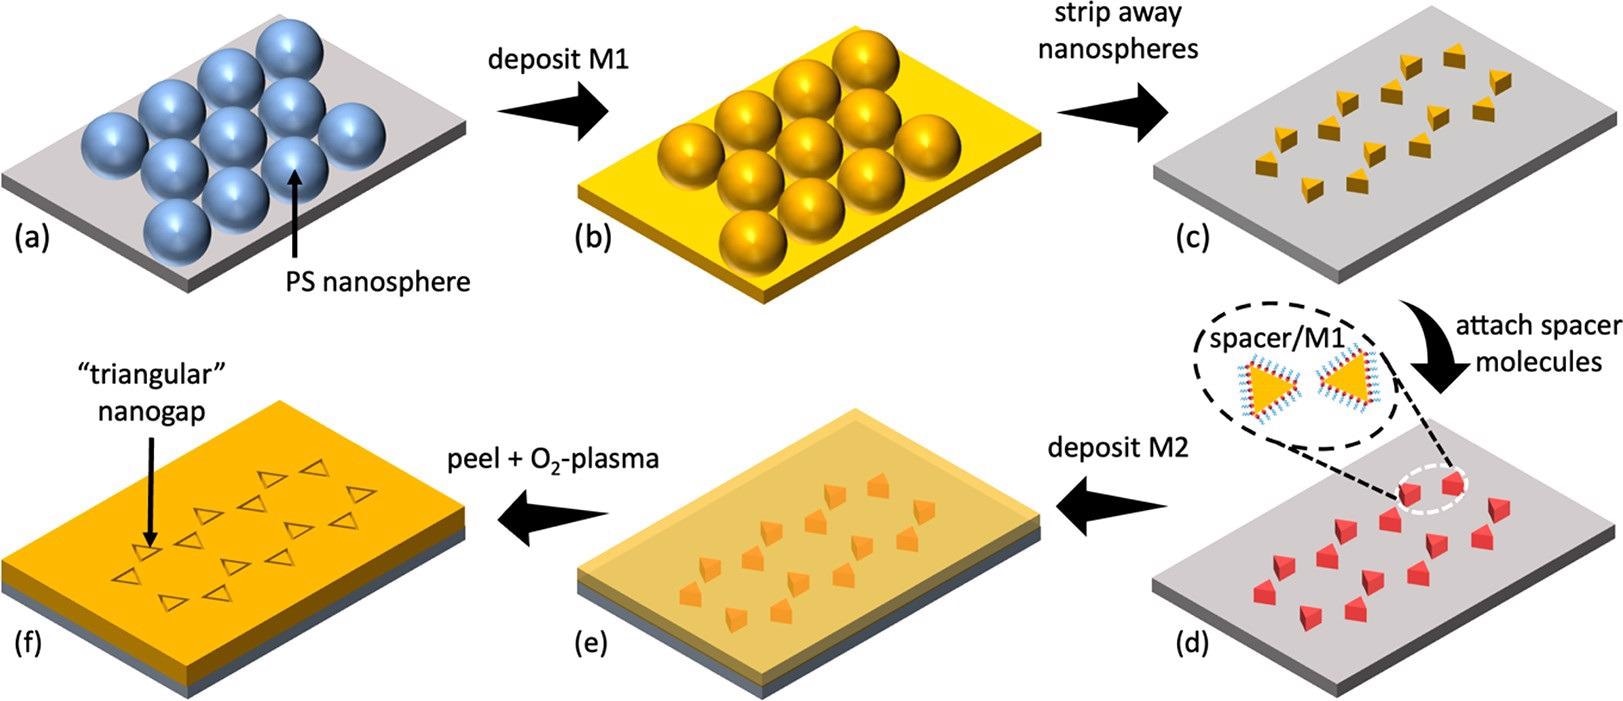 Fabrication procedure for triangular nanogap arrays: first, a monolayer of close-packed polystyrene nanospheres is drop-cast on a substrate and gently treated with an oxygen plasma to reduce surface asperities (a); second, a 50 nm layer of a first metal [M1] is deposited by e-beam deposition onto the nanosphere-coated substrate (b); third, the nanosphere template is removed by tape-stripping, leaving an array of triangular-shaped metal features on the substrate (c); fourth, the metal triangles are conformally coated with a molecular spacer formed from a self-assembled monolayer (SAM) or a self-assembled multilayer (d); fifth, the entire substrate is coated with a 30 nm layer of a second metal [M2] (e); and sixth, an adhesive film is applied to the upper surface of M2 and then stripped away, removing the parts of M2 that lie directly above the first metal. Finally, treatment with an oxygen plasma removes the spacer molecules, leaving M1 and M2 side by side on the substrate with triangular nanoscale gaps between them that are approximately equal in width to the length of the molecular spacer (f).